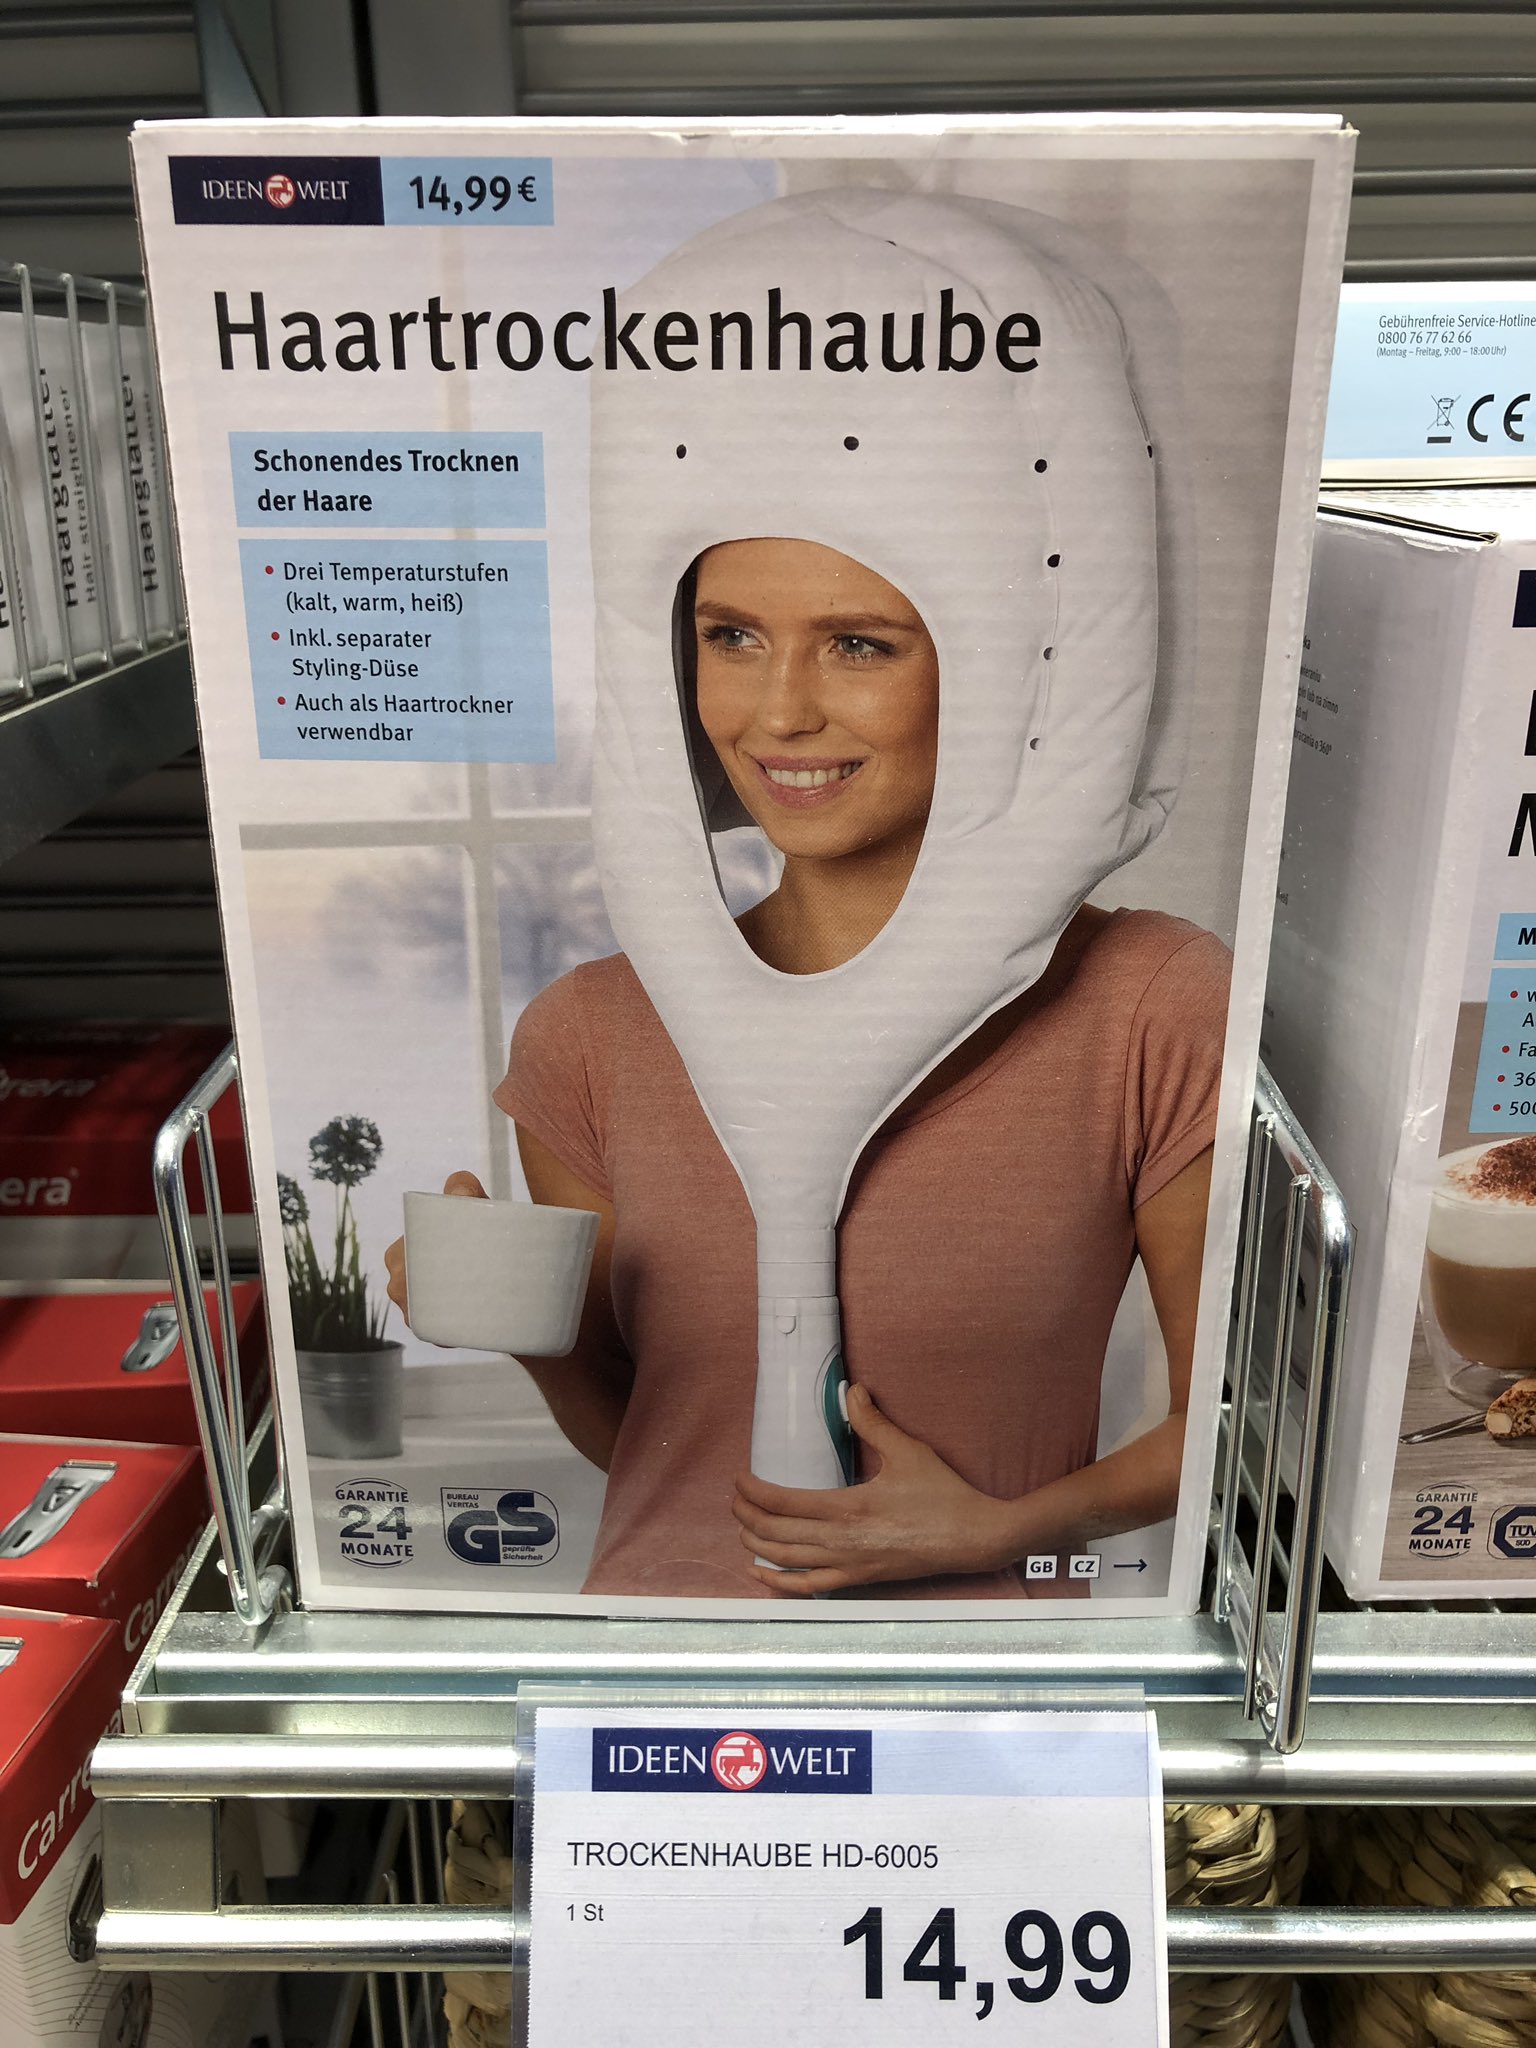 Chantal Sullivan-Thomsett on X: "If you're in Germany this Valentine's Day,  why not pick up that special someone a hair drying hood, only 14.99 from @ rossmann so they can enjoy a nice